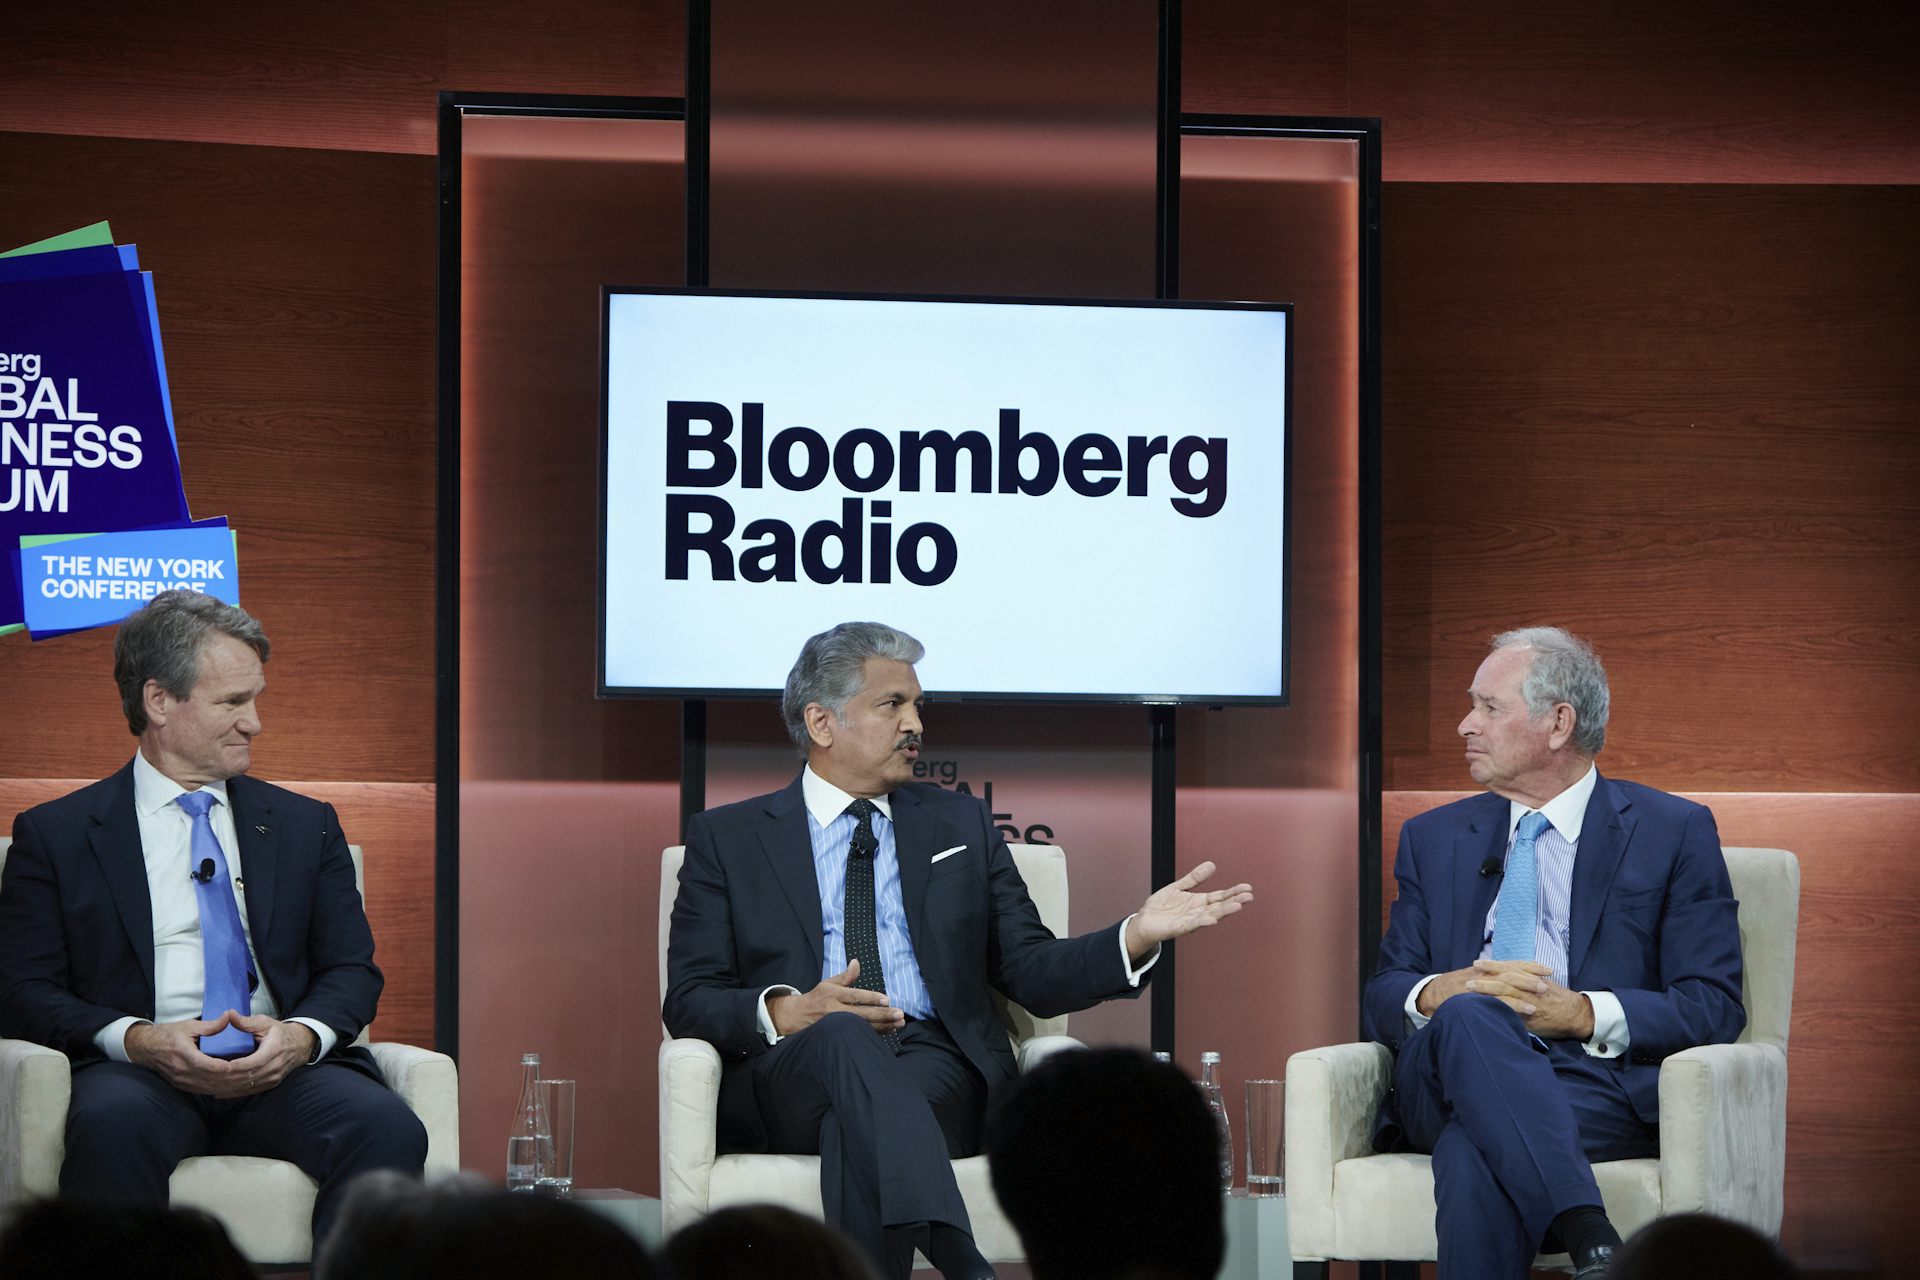 Three CEOs sit on comfy chairs in front of a Bloomberg Radio sign on a screen.